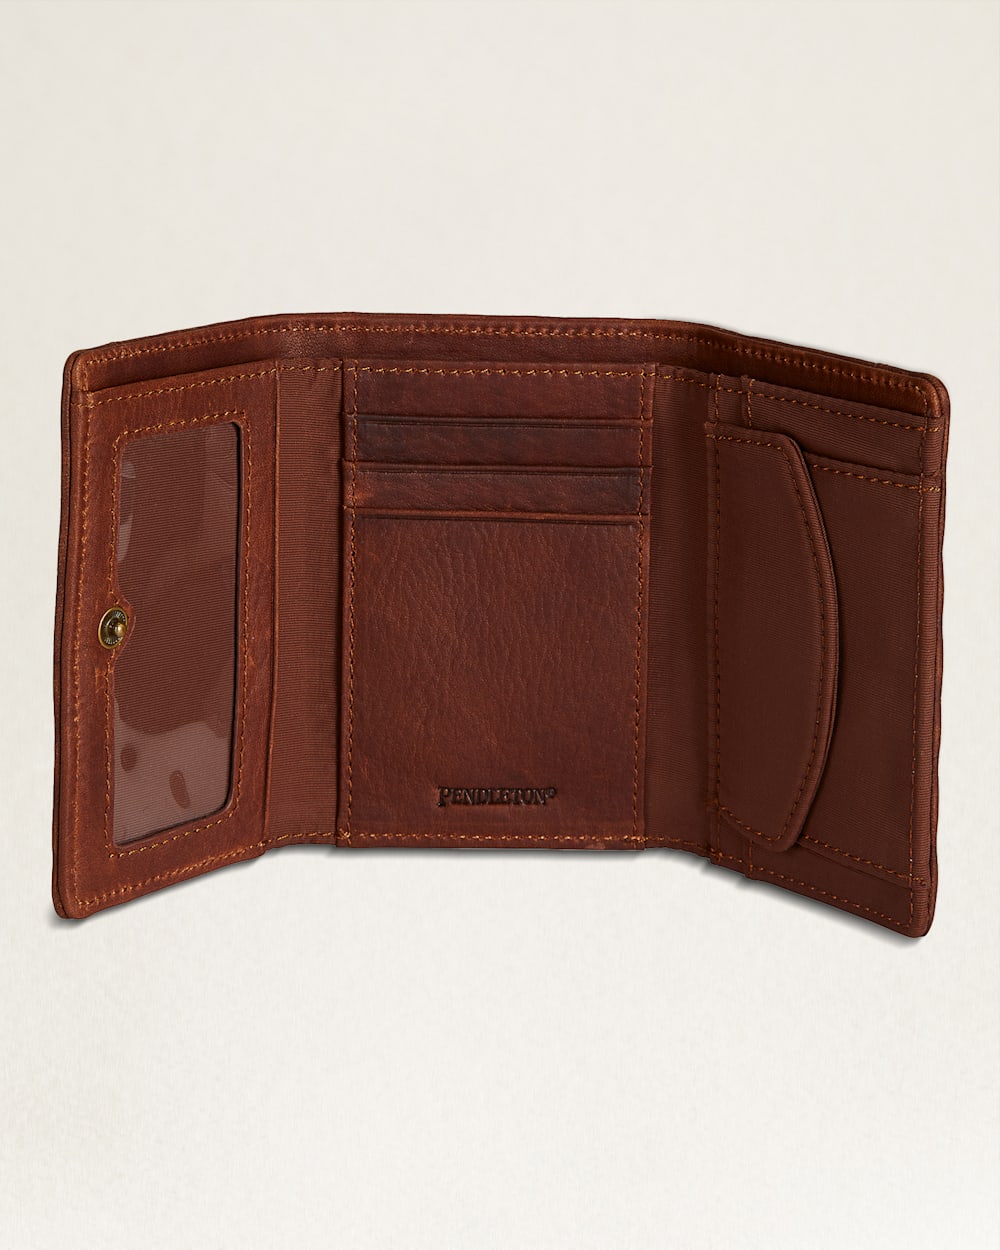 ALTERNATE VIEW OF DESERT DAWN TRIFOLD WALLET IN TAN MIX image number 2